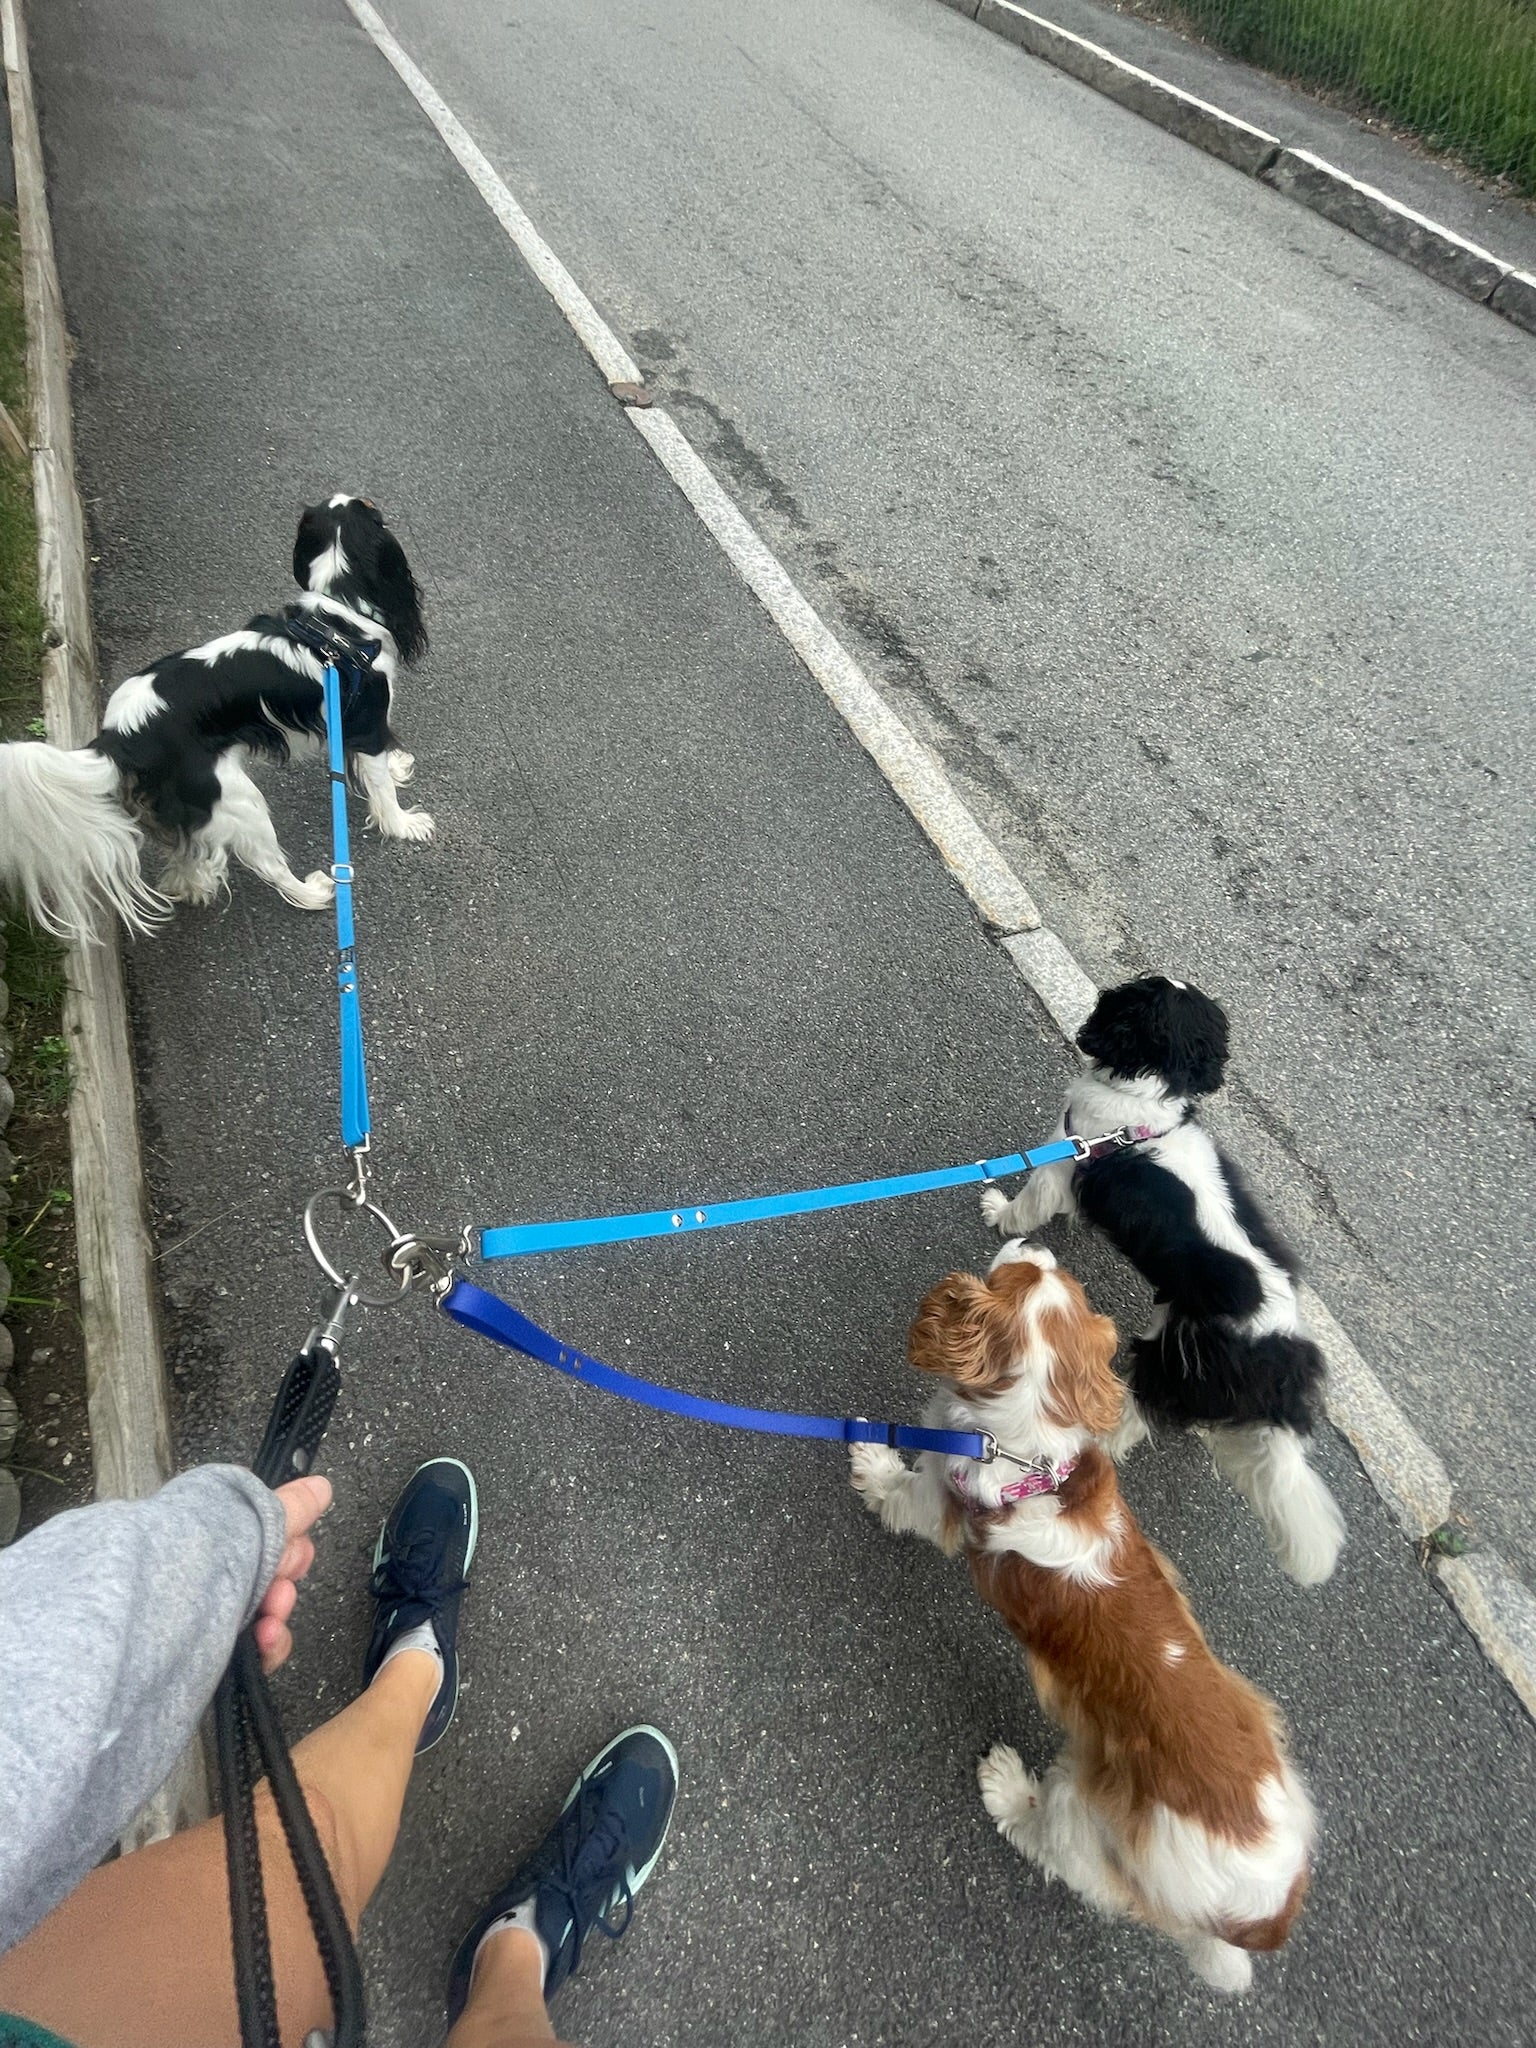 3 dogs leashed to a connecting ring. The leashes are bright blue TinyHorse leashes.